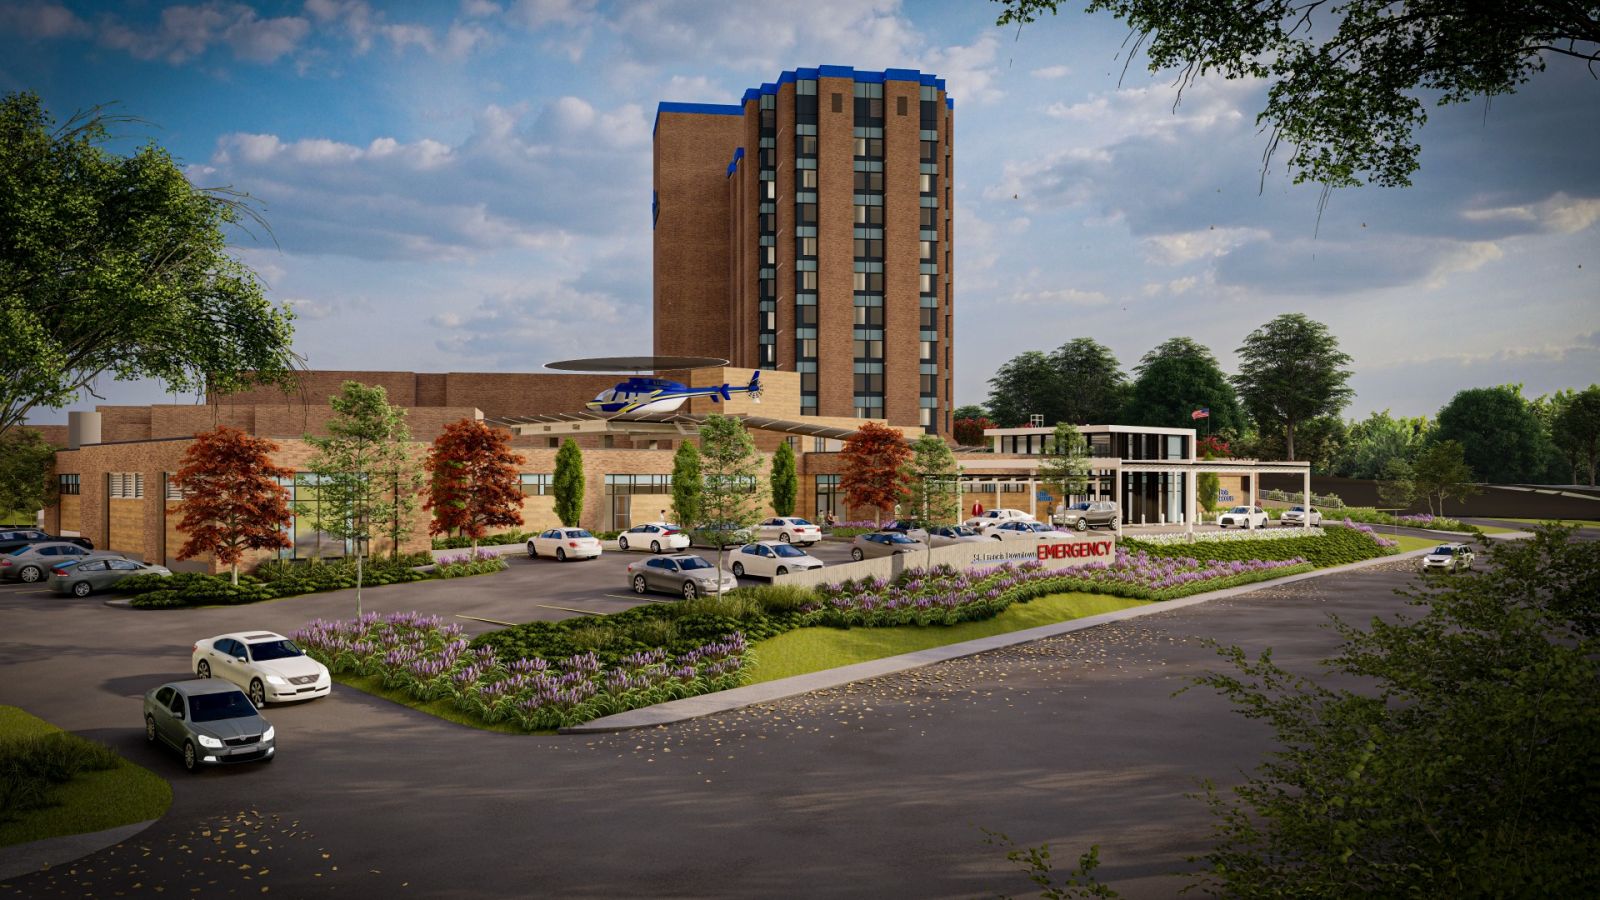 Staff at new emergency department will start seeing patients Nov. 30. (Rendering/Provided)